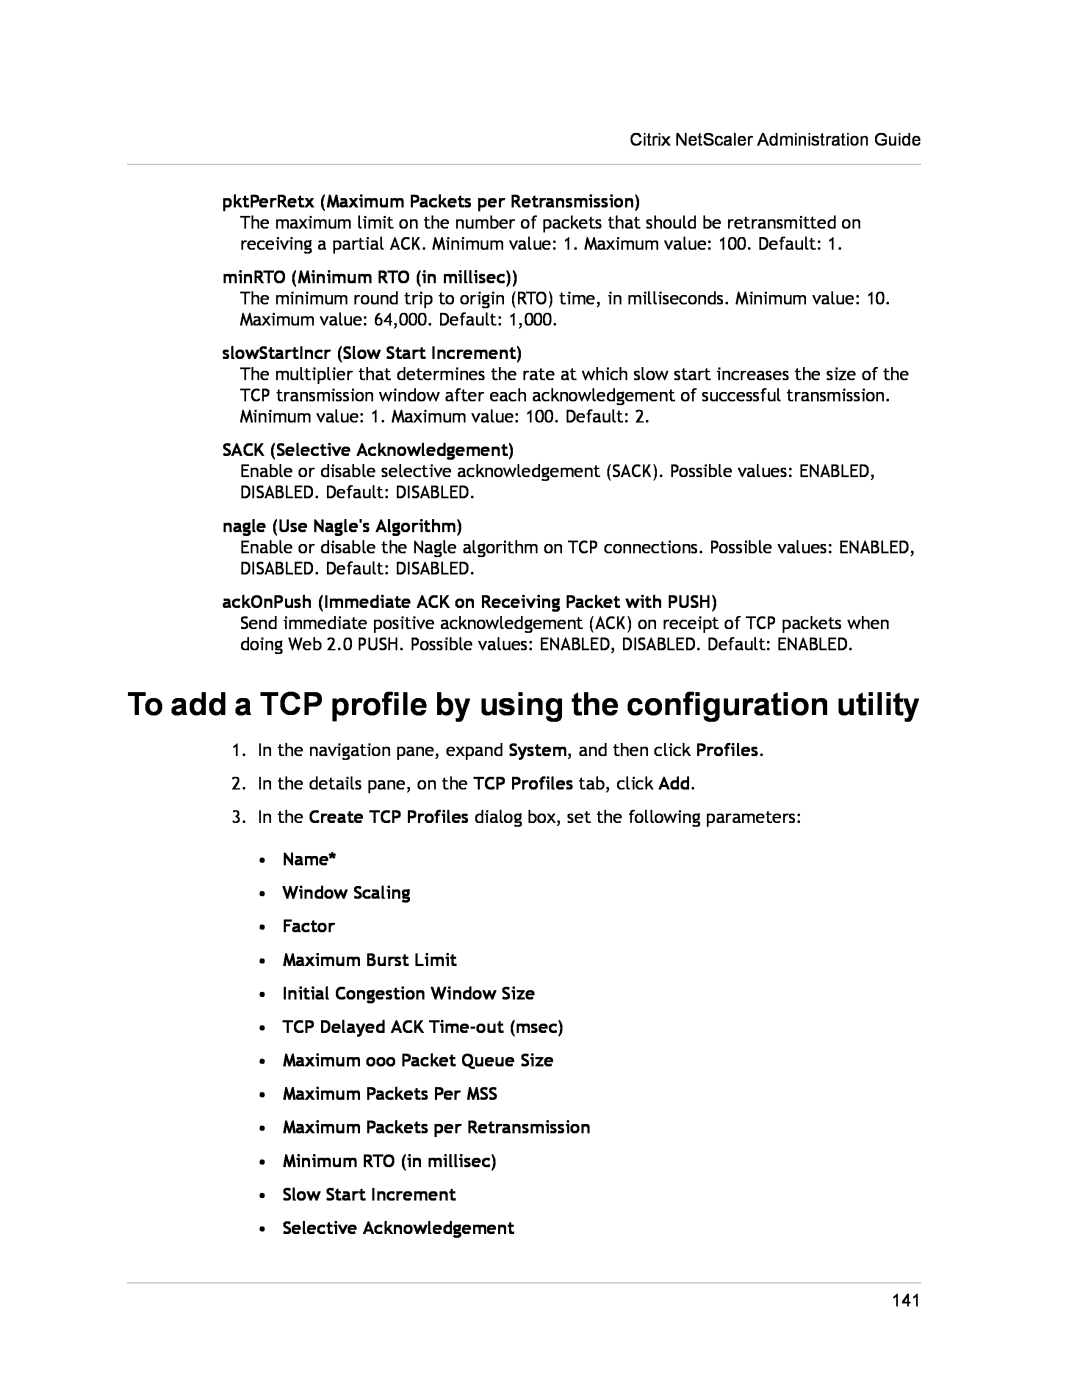 Citrix Systems CITRIX NETSCALER 9.3 To add a TCP profile by using the configuration utility, nagle Use Nagles Algorithm 